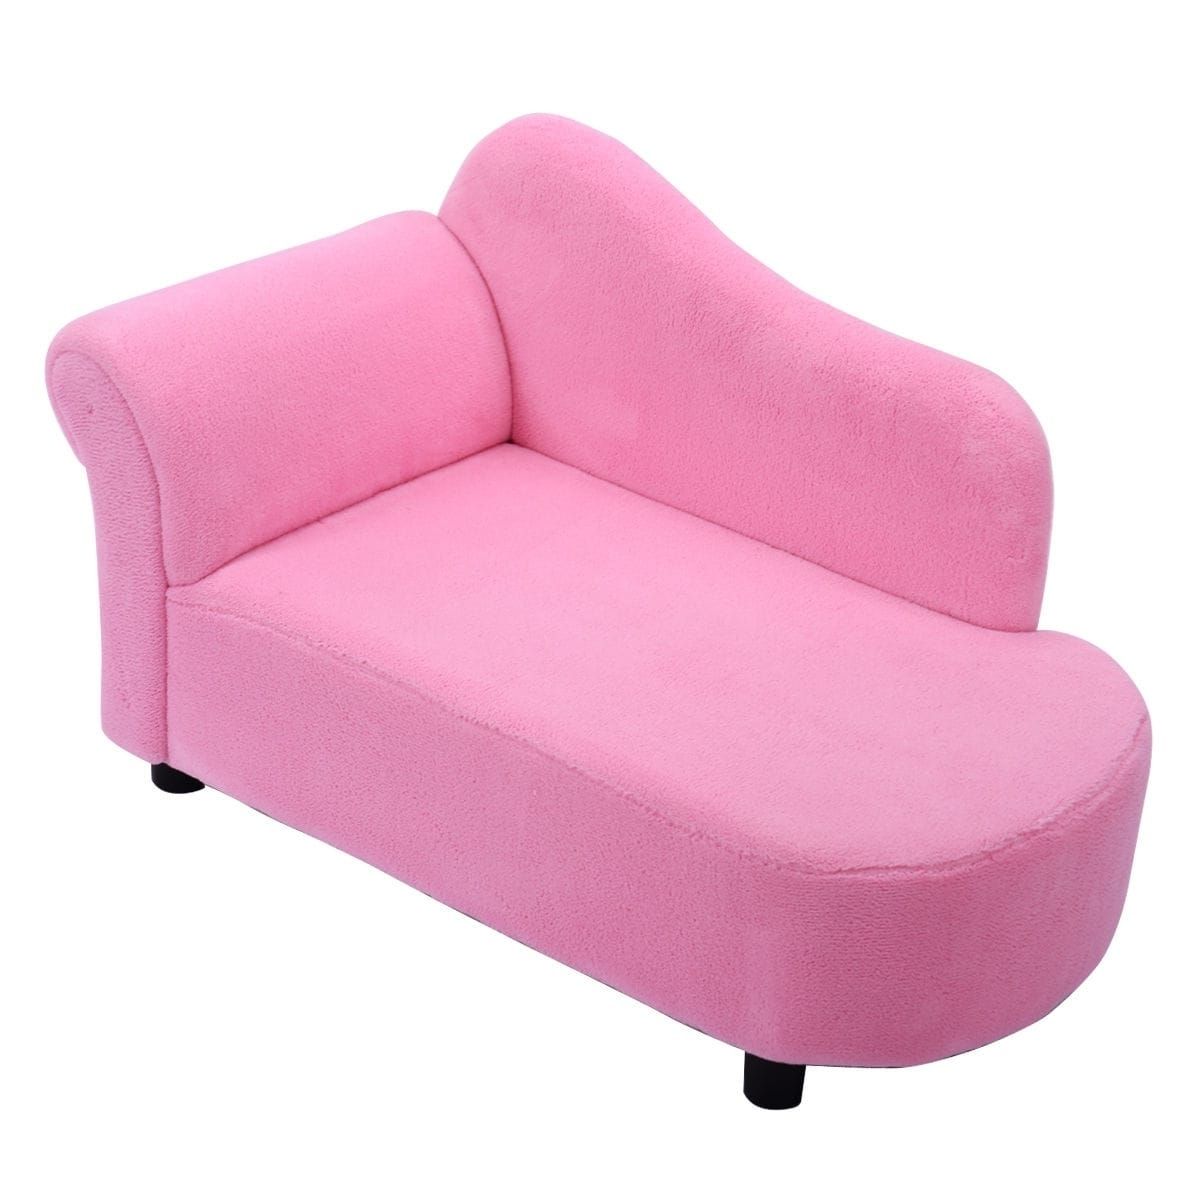 Cheap Kids Sofas Pertaining To Latest Costway Kids Sofa Armrest Chair Couch Lounge In Pink – Free (View 4 of 20)